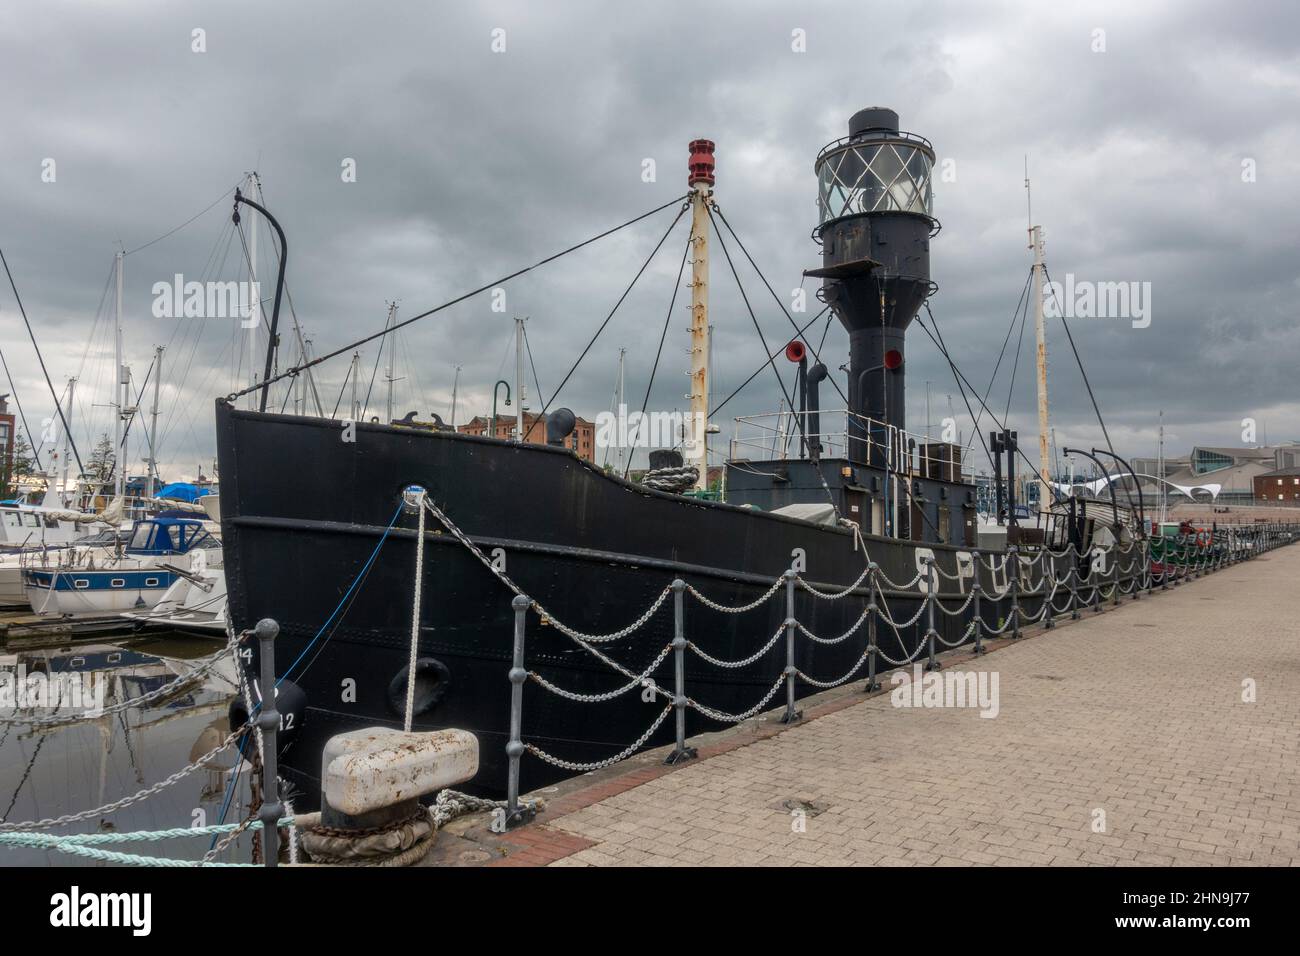 The Spurn Lightship in the old docks area of Kingston Upon Hull, East Riding of Yorkshire, UK. Stock Photo